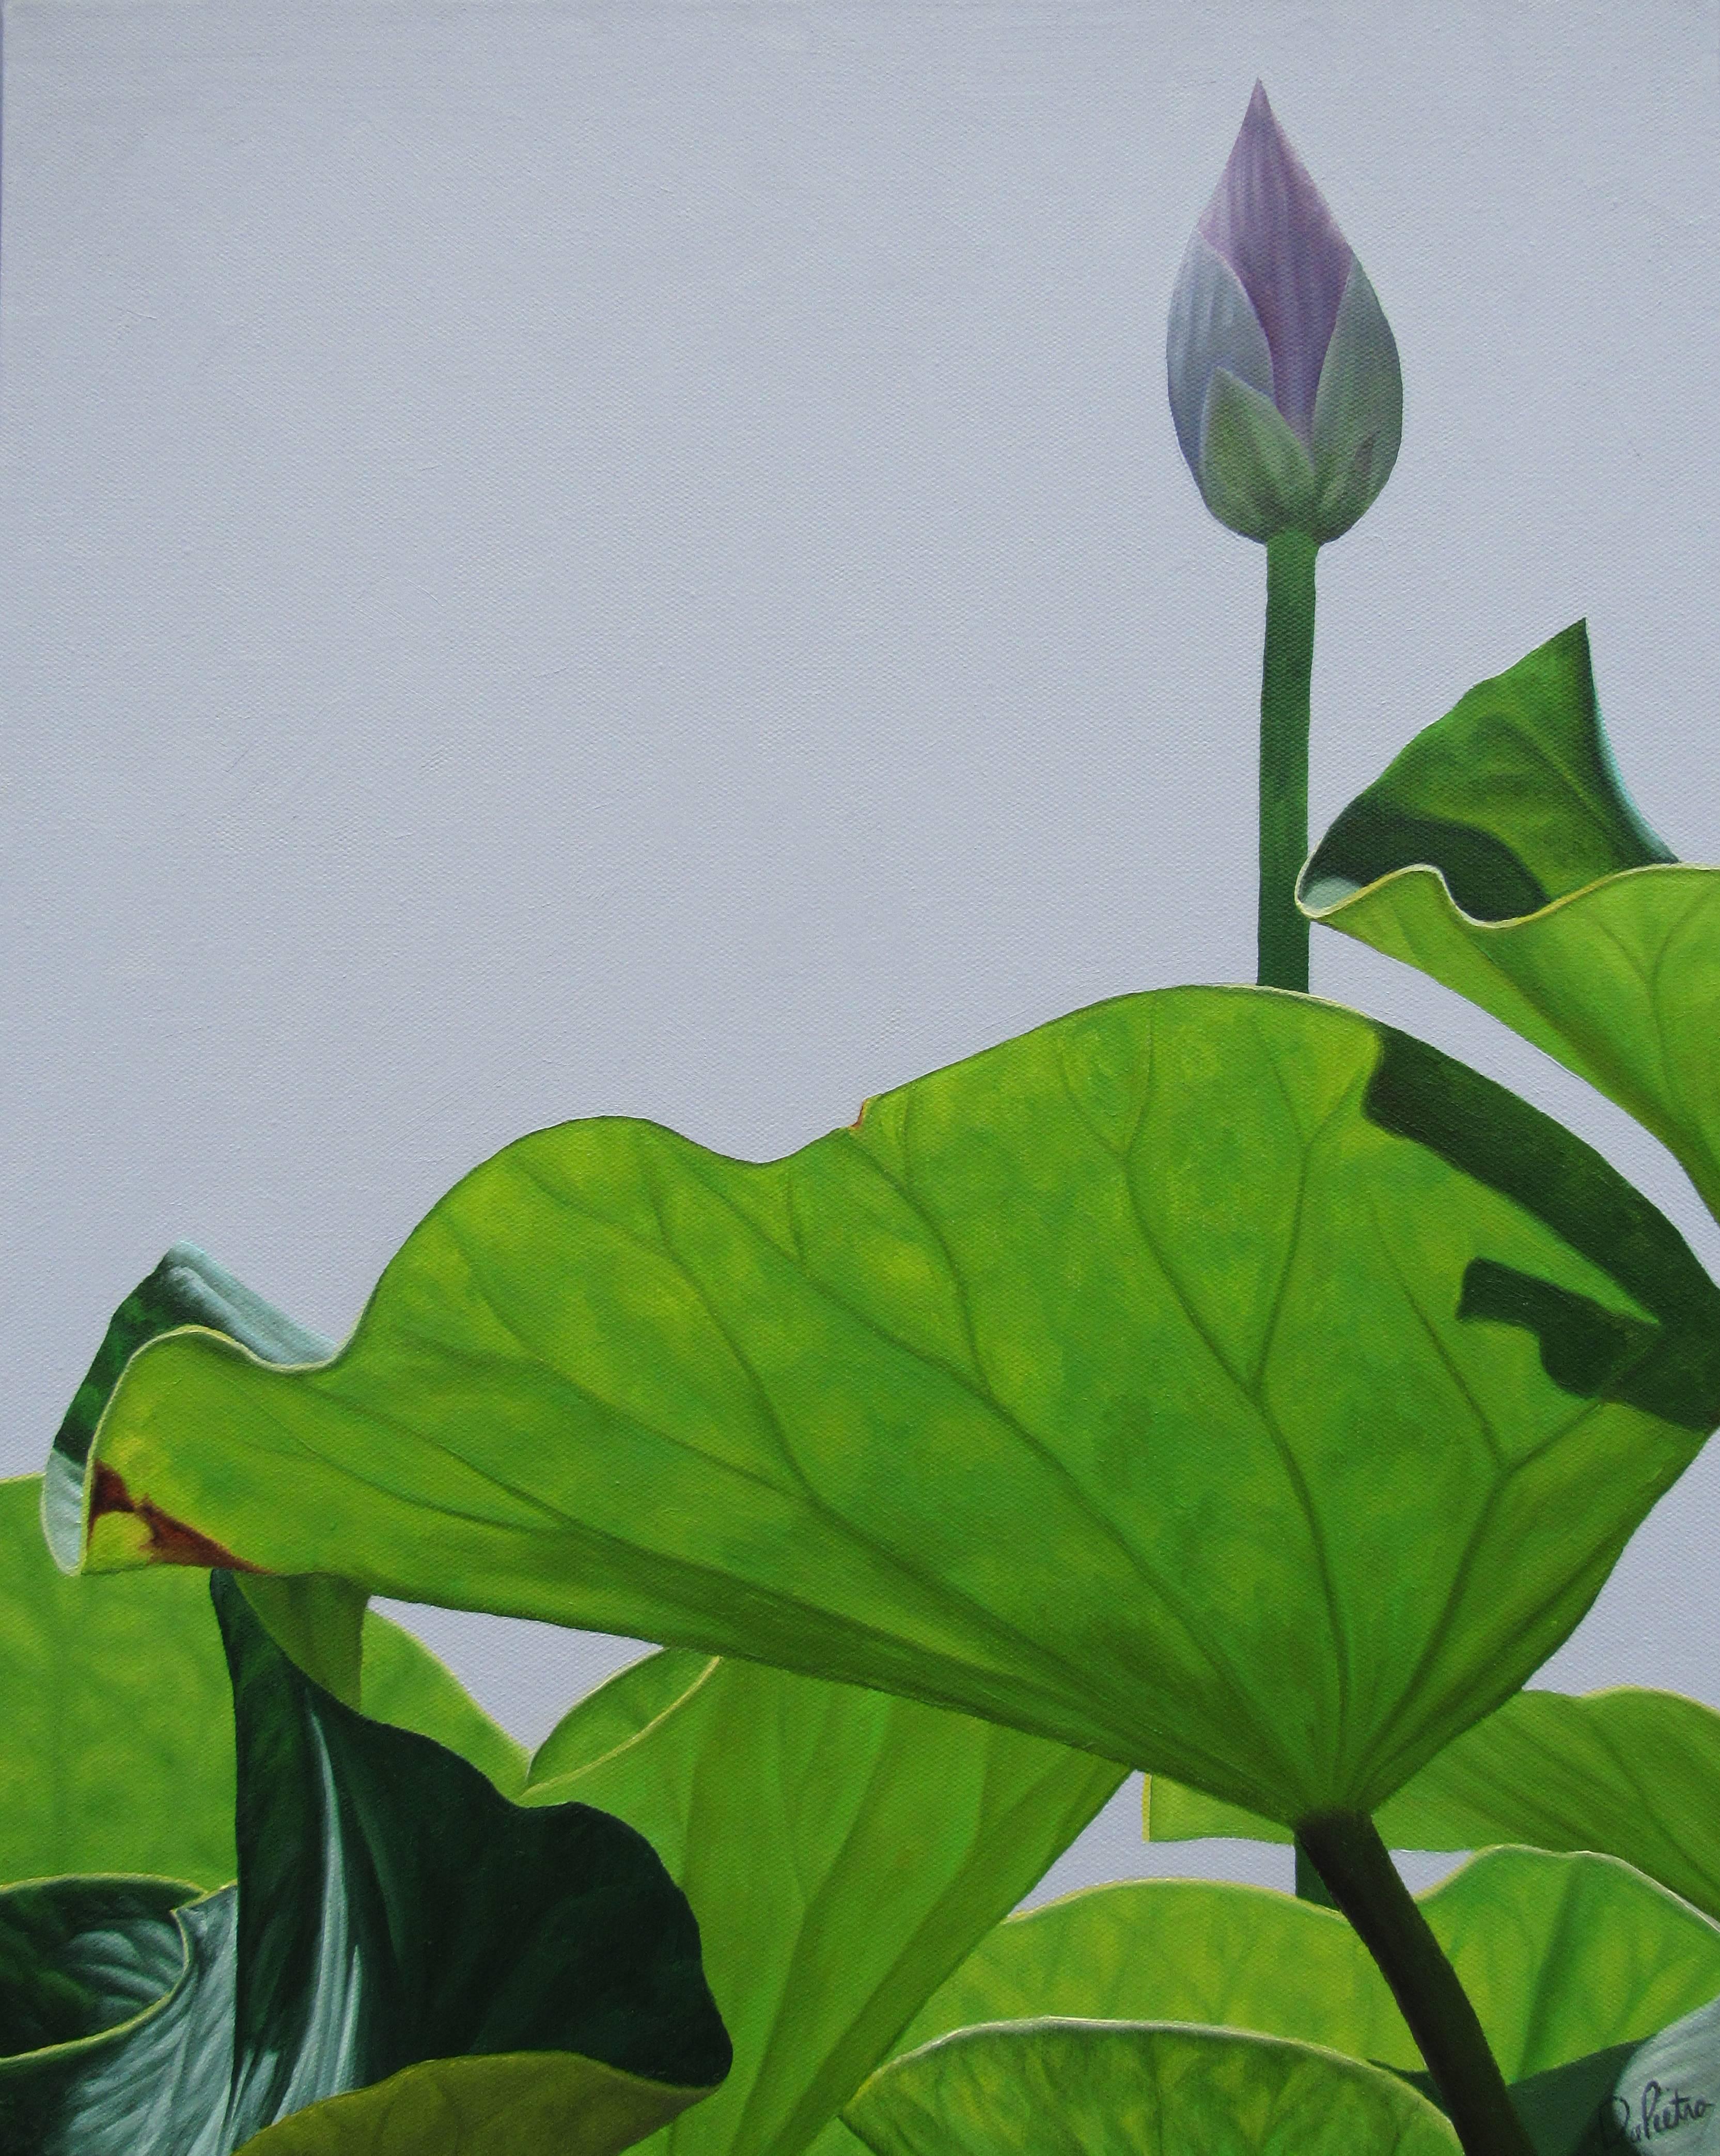 Lotus No. 8 (Realist Still Life Painting of Green lotus leaves and flower buds)